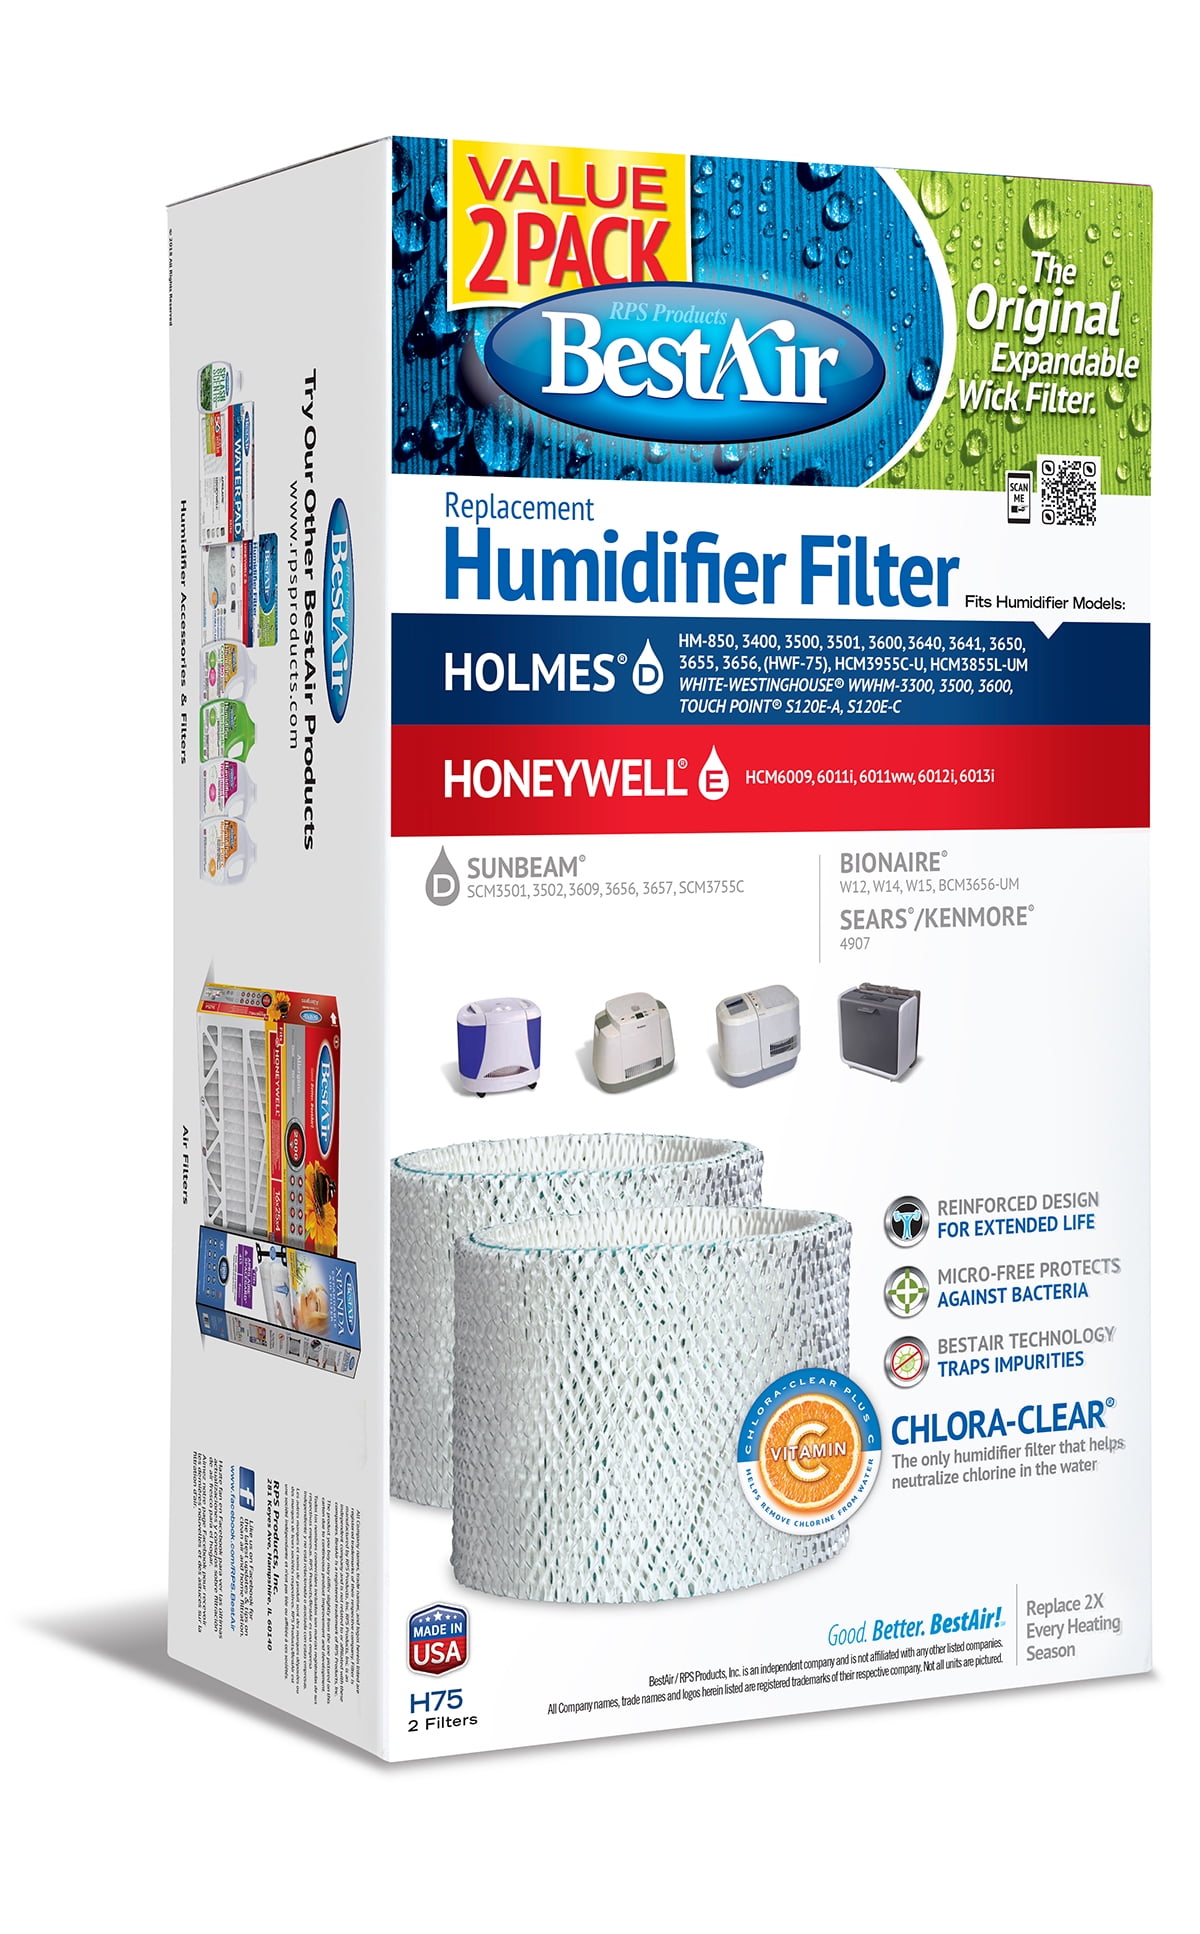 5x Humidifier Filter for Holmes HWF75,HM3655,3500,Sunbeam SCM3501